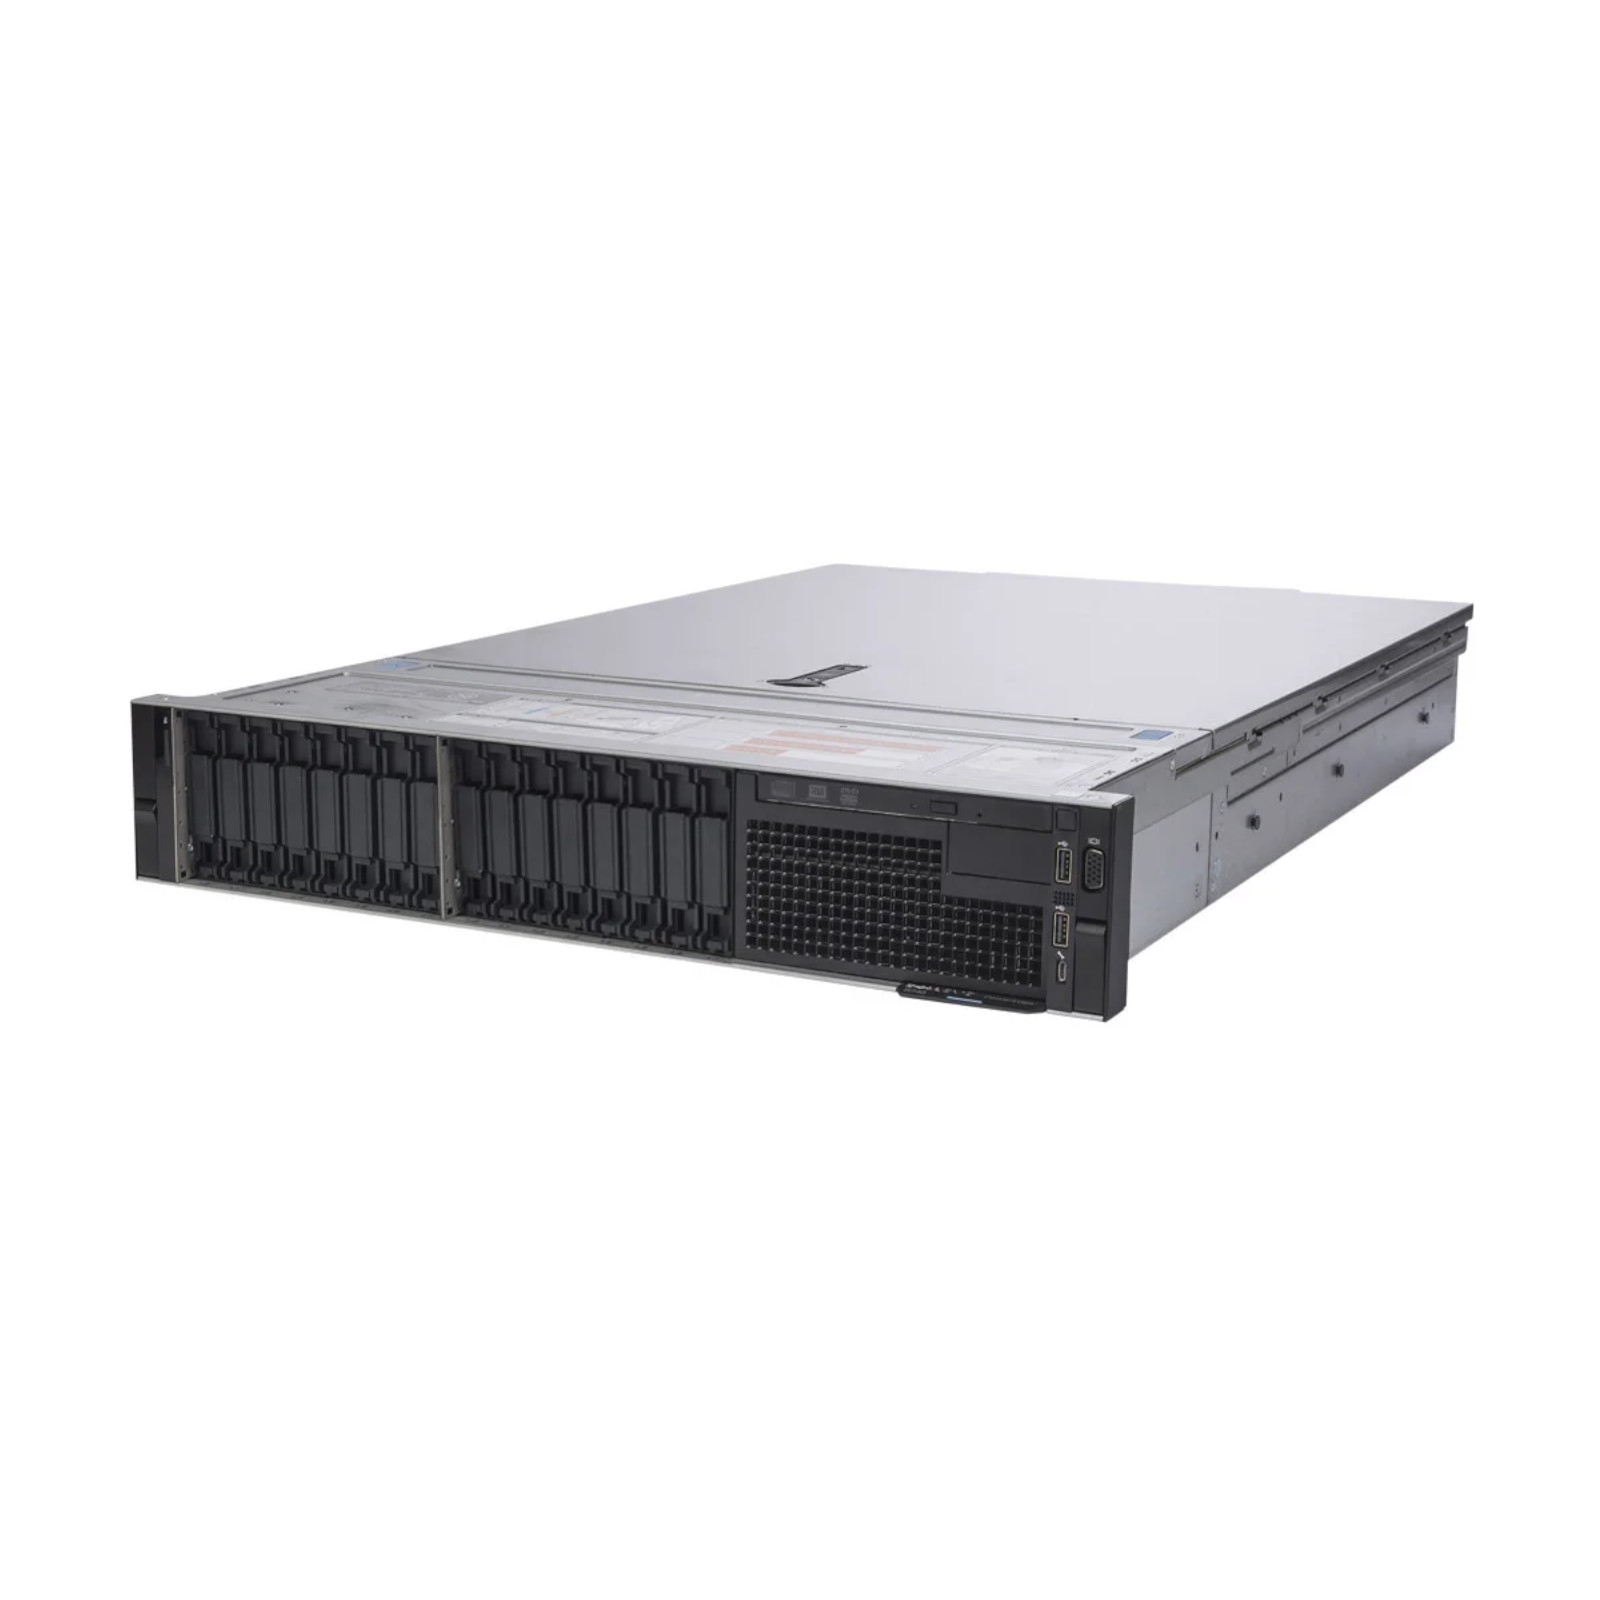 Dell PowerEdge R740 16SFF CTO Server: Up to 2x Xeon Scalable CPU, 3TB DDR4, SAS